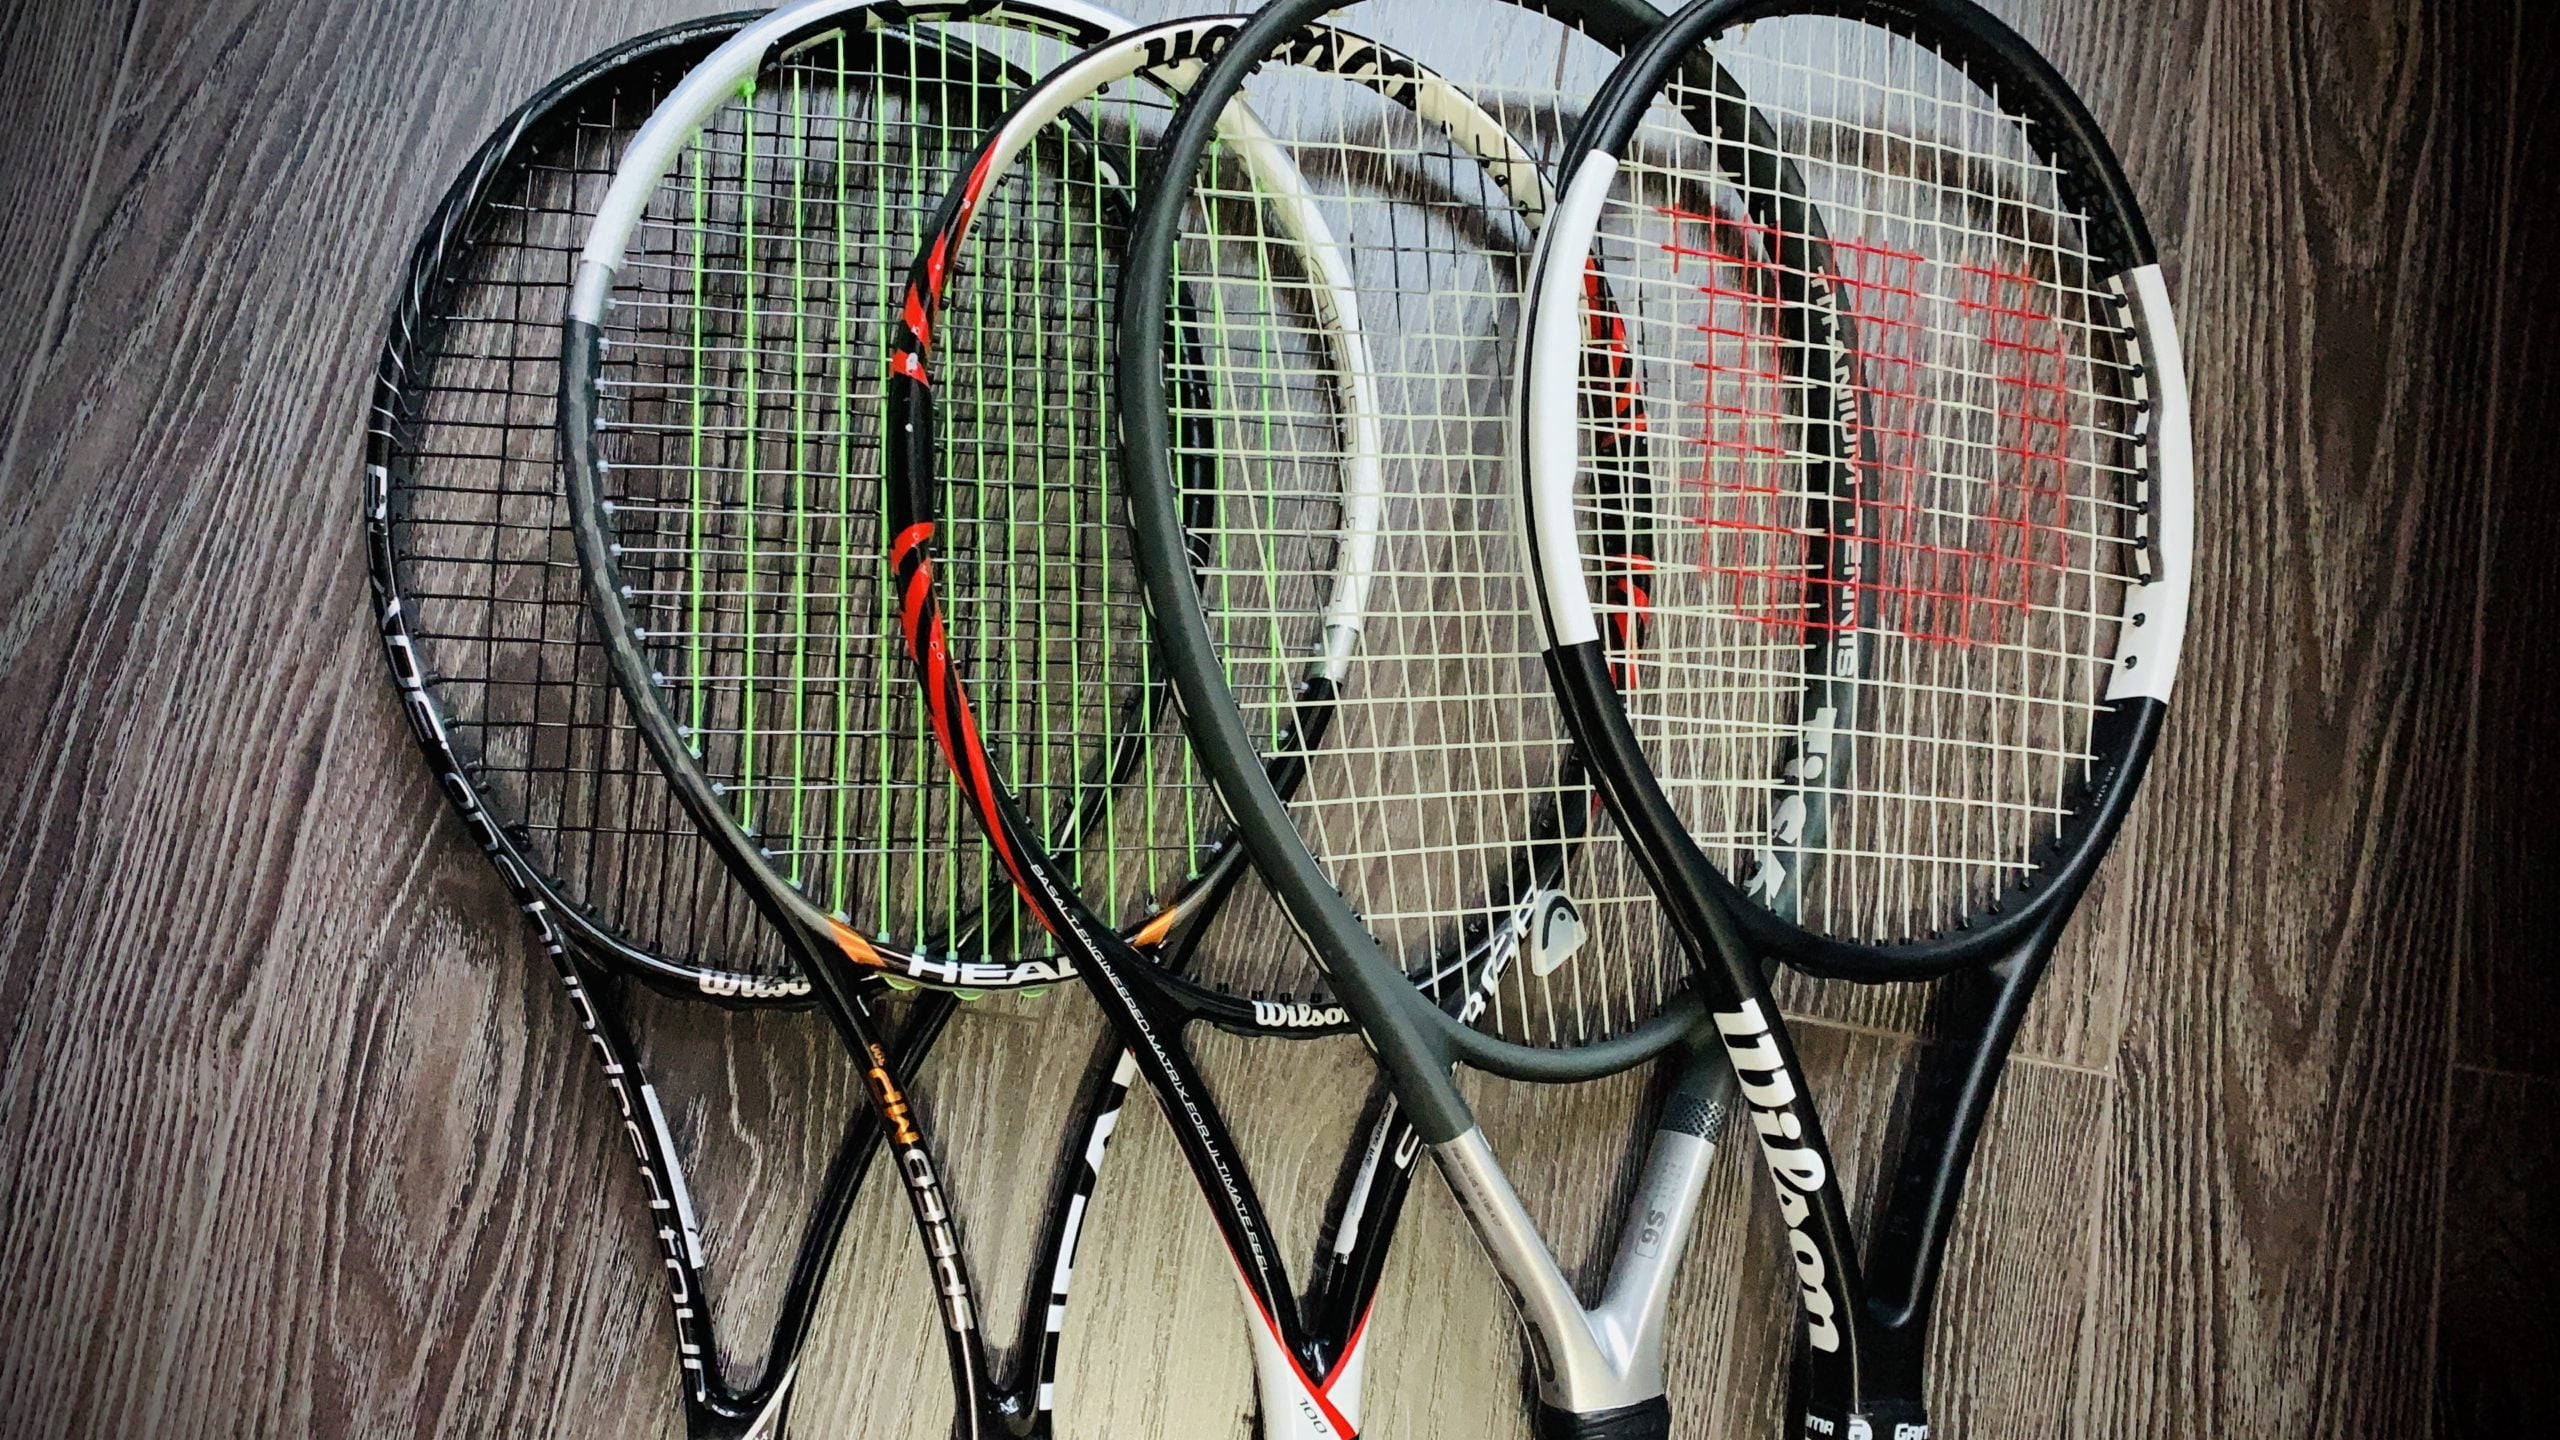 how to start racket stringing business